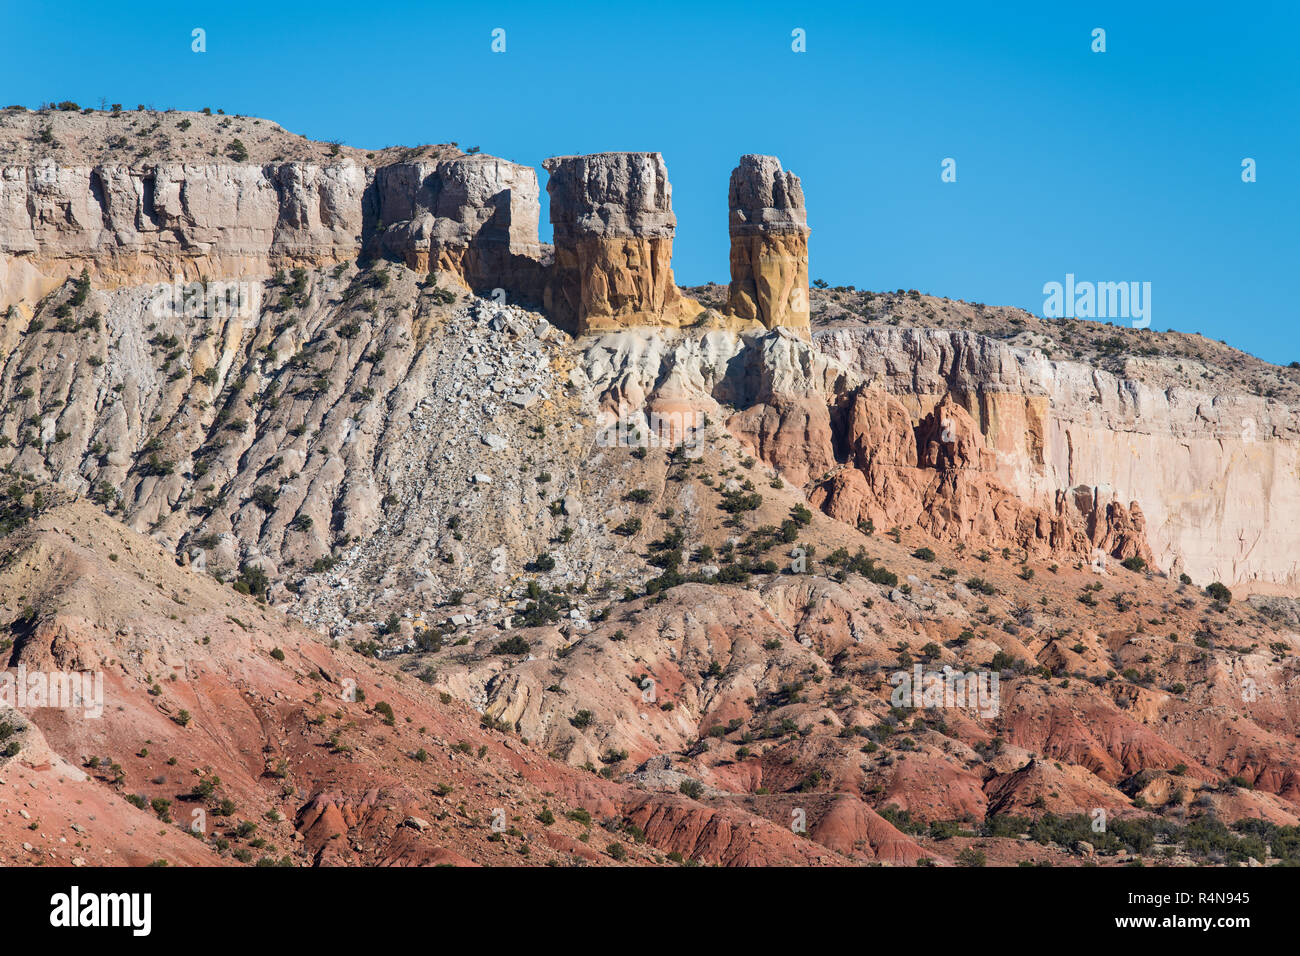 Colorful rock formations and towers in the desert landscape of Ghost Ranch near Abiquiu, New Mexico in the American Southwest Stock Photo